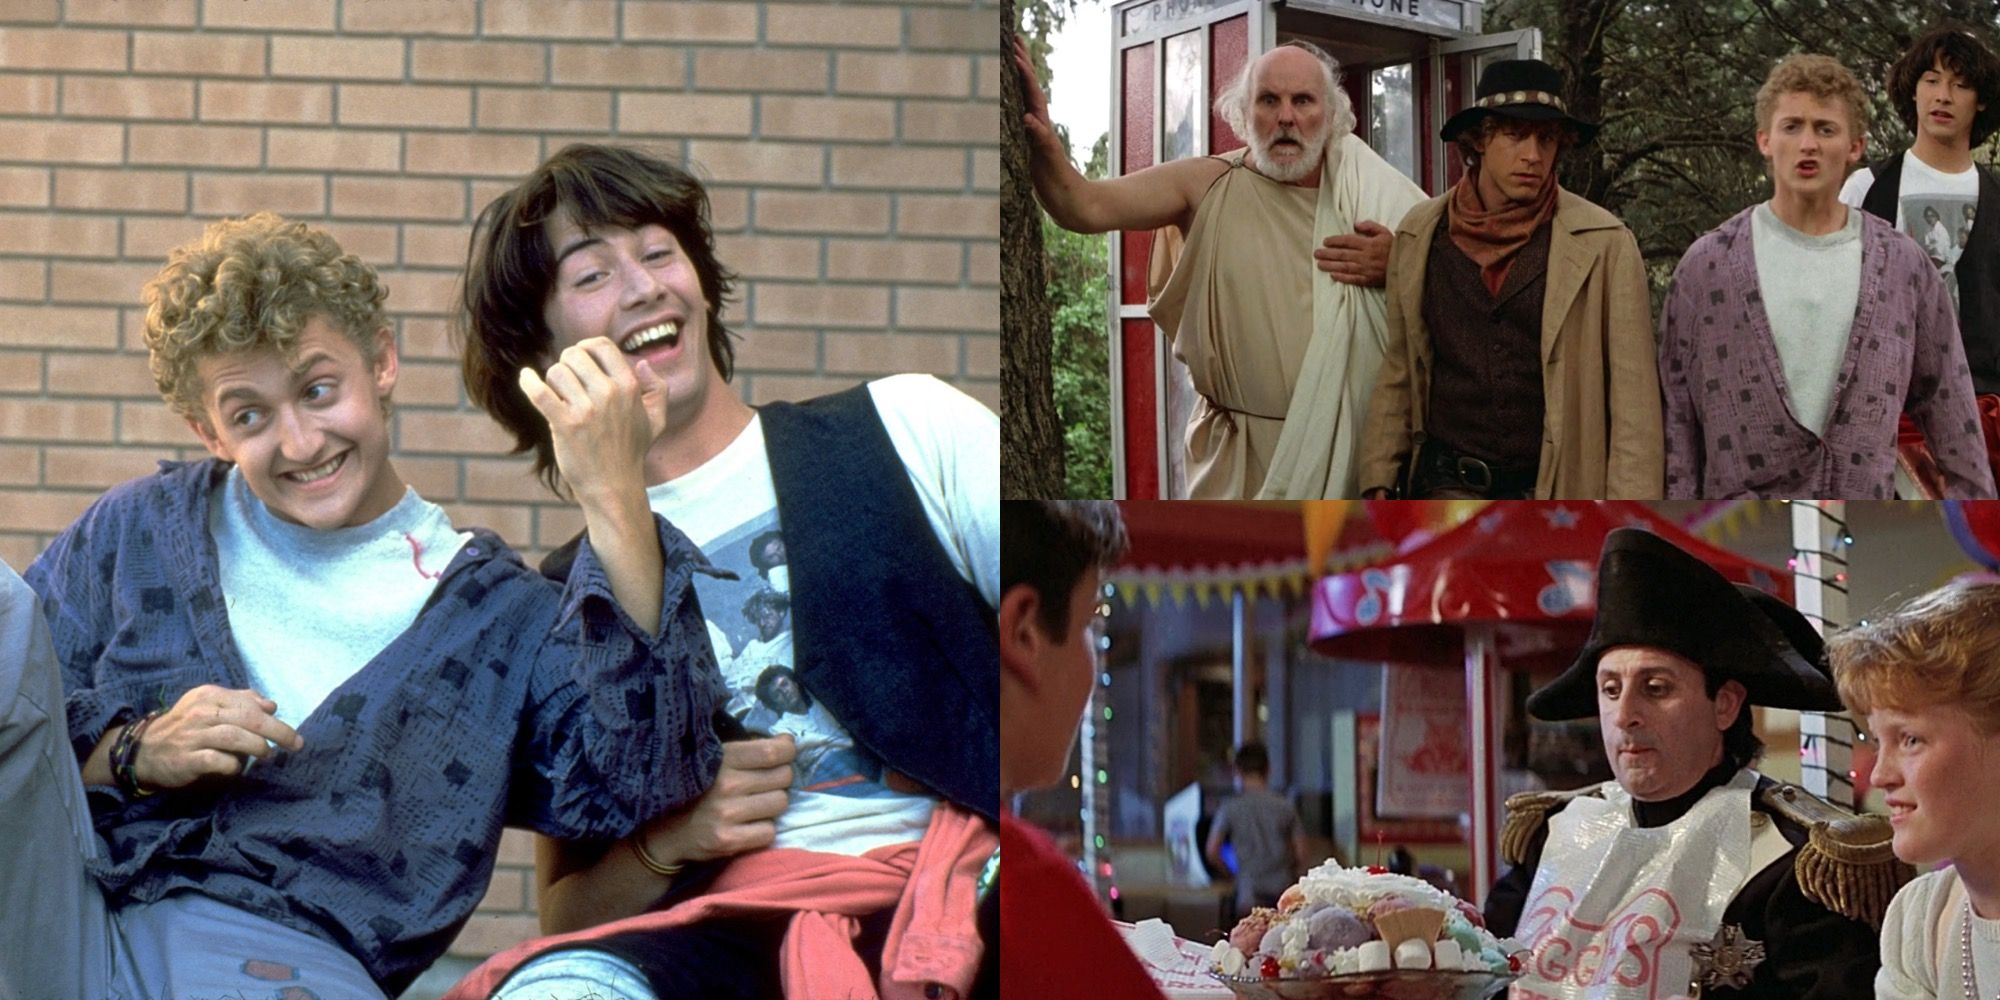 Triple Split Image Of Promo Photos From Bill And Ted’s Excellent Adventure